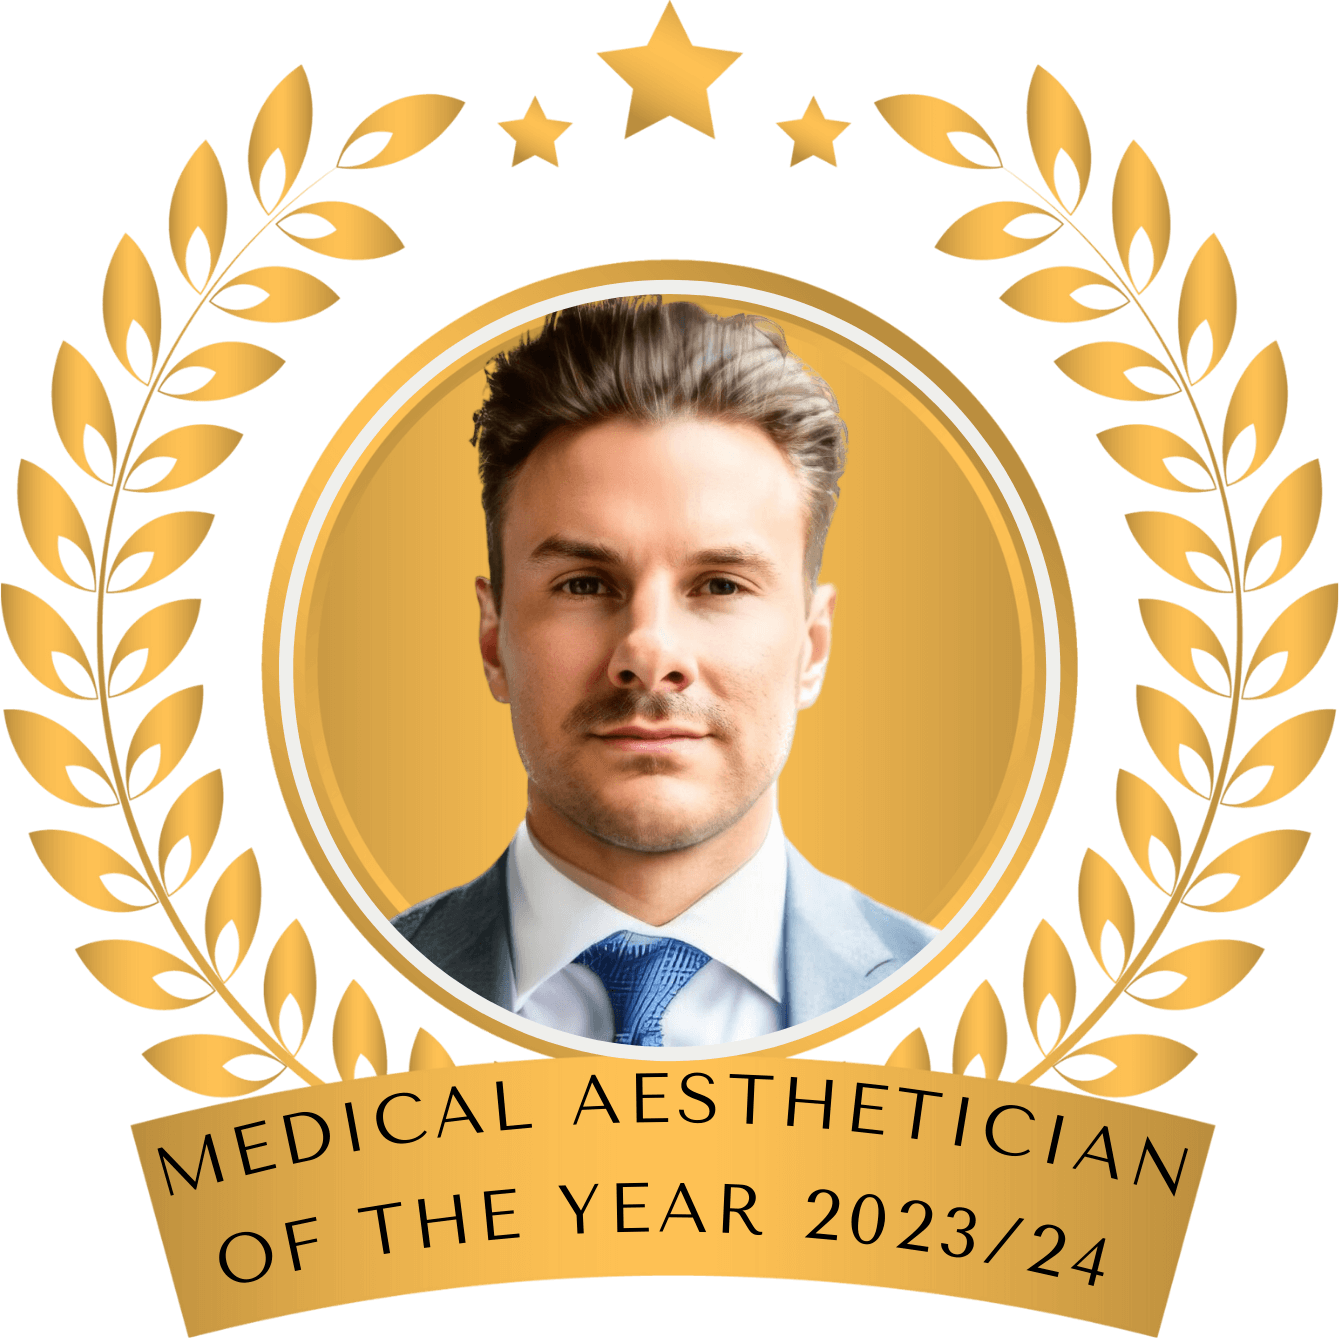 Medical Aesthetician of the Year 2023/24 - Botox Wakefield